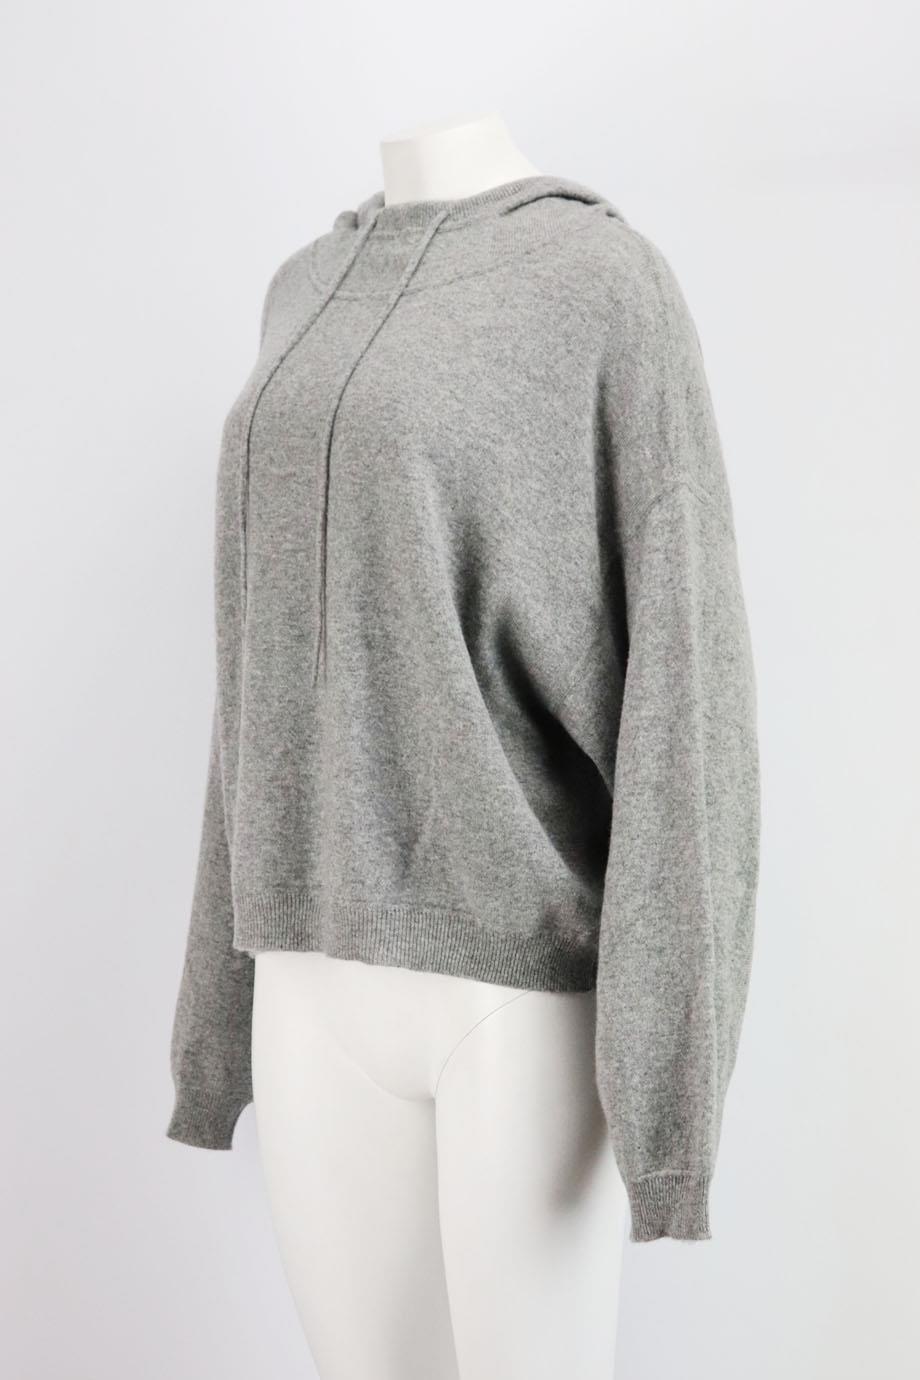 This 'Linosa' hoodie by LouLou Studio is spun from fine Mongolian cashmere and knitted for a roomy fit and embroidered with the brand's tonal shell emblem. Grey cashmere. Slips on. 100% Cashmere. Size: Large (UK 12, US 8, FR 40, IT 44). Bust